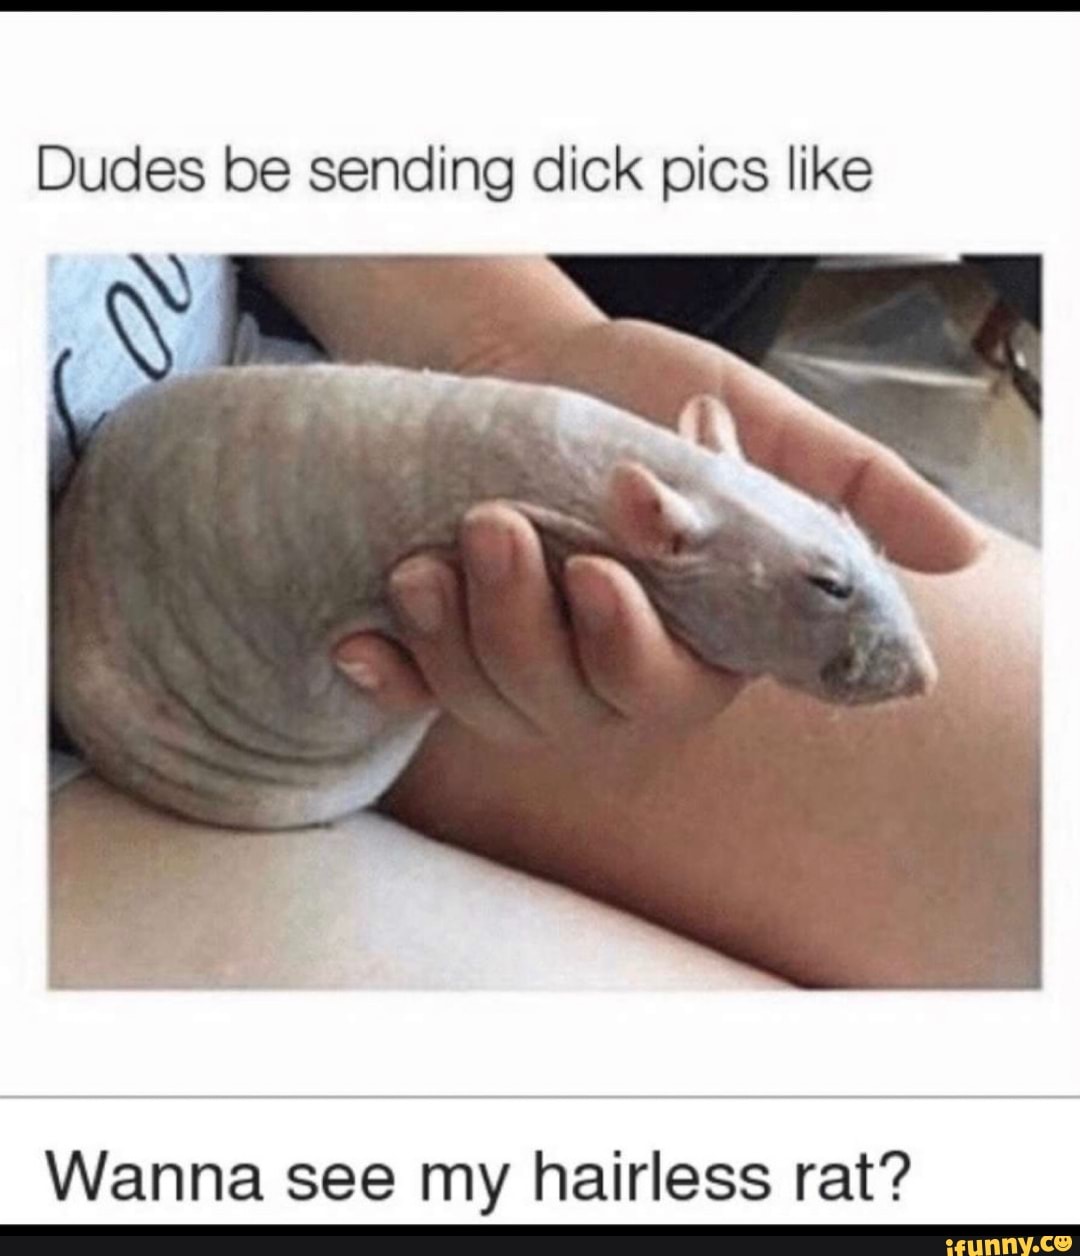 What does a dick pic look like